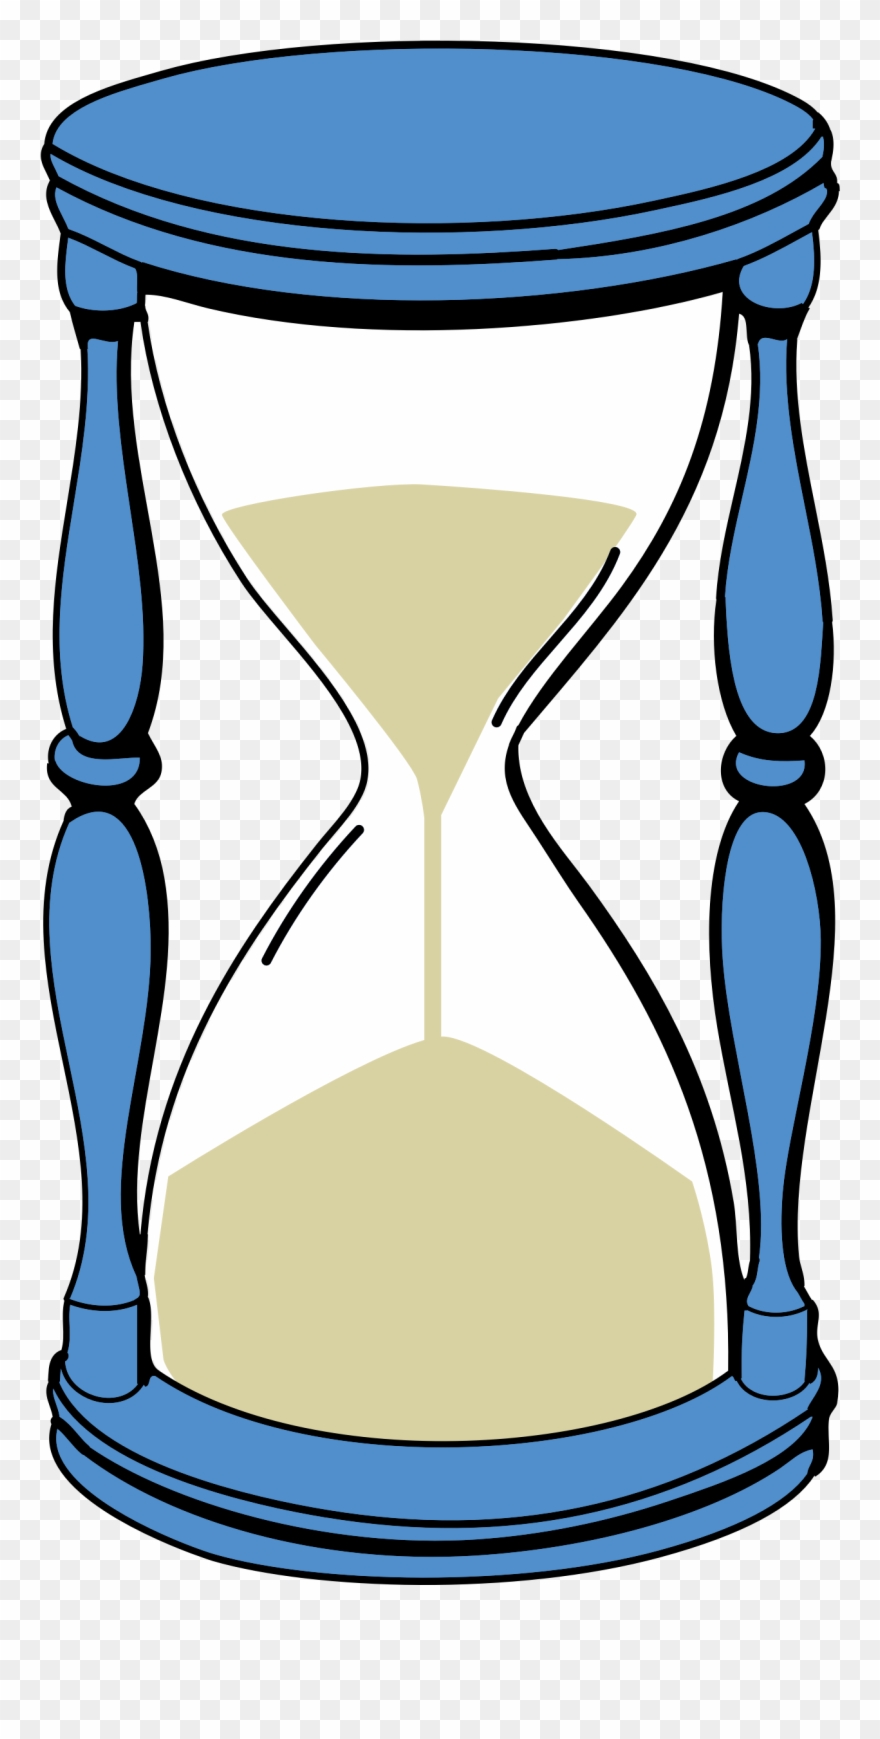 Hourglass Clipart Time Capsule.